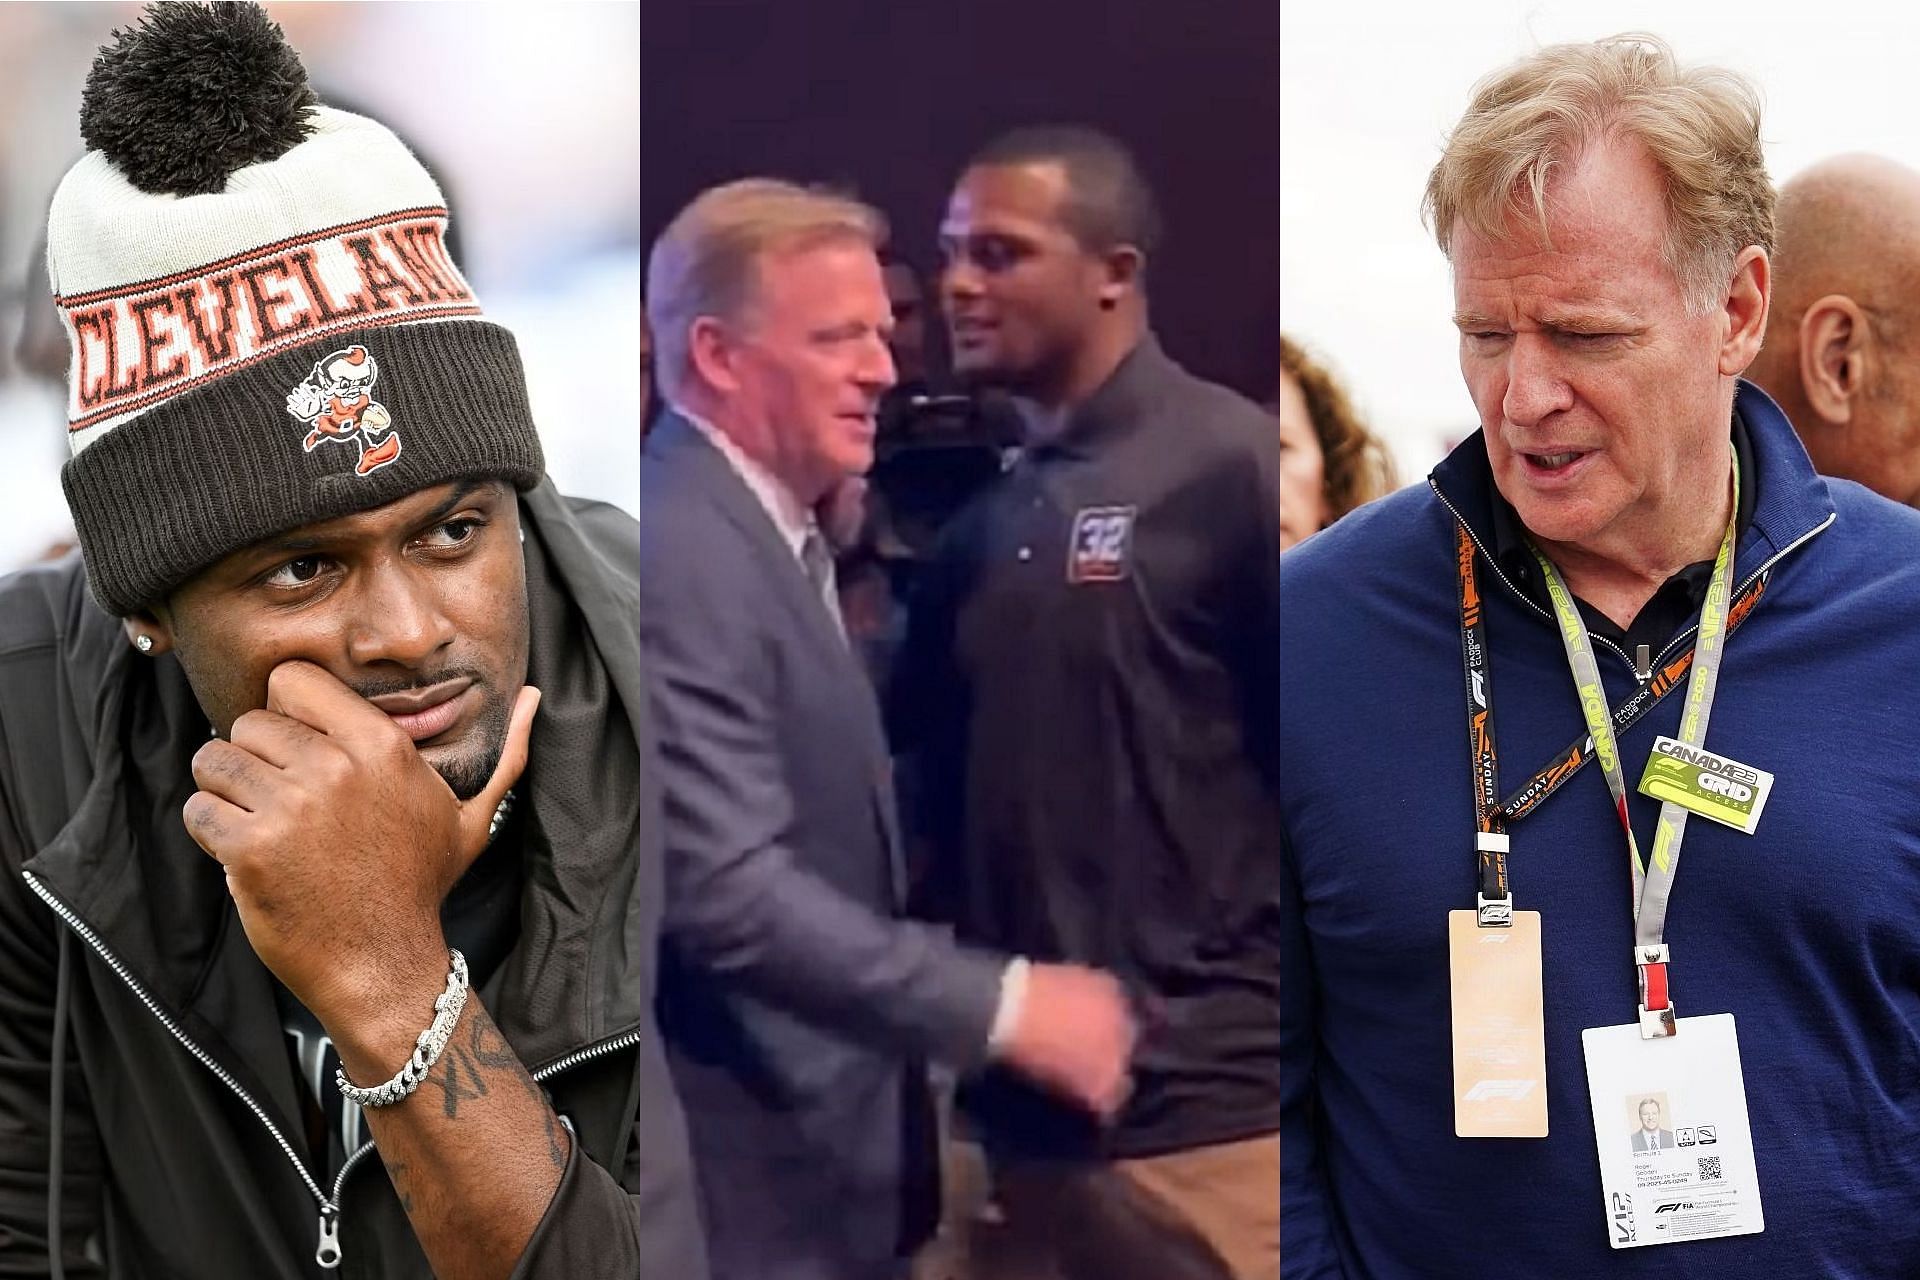 Roger Goodell faces backlash from fans after video with Deshaun Watson goes viral